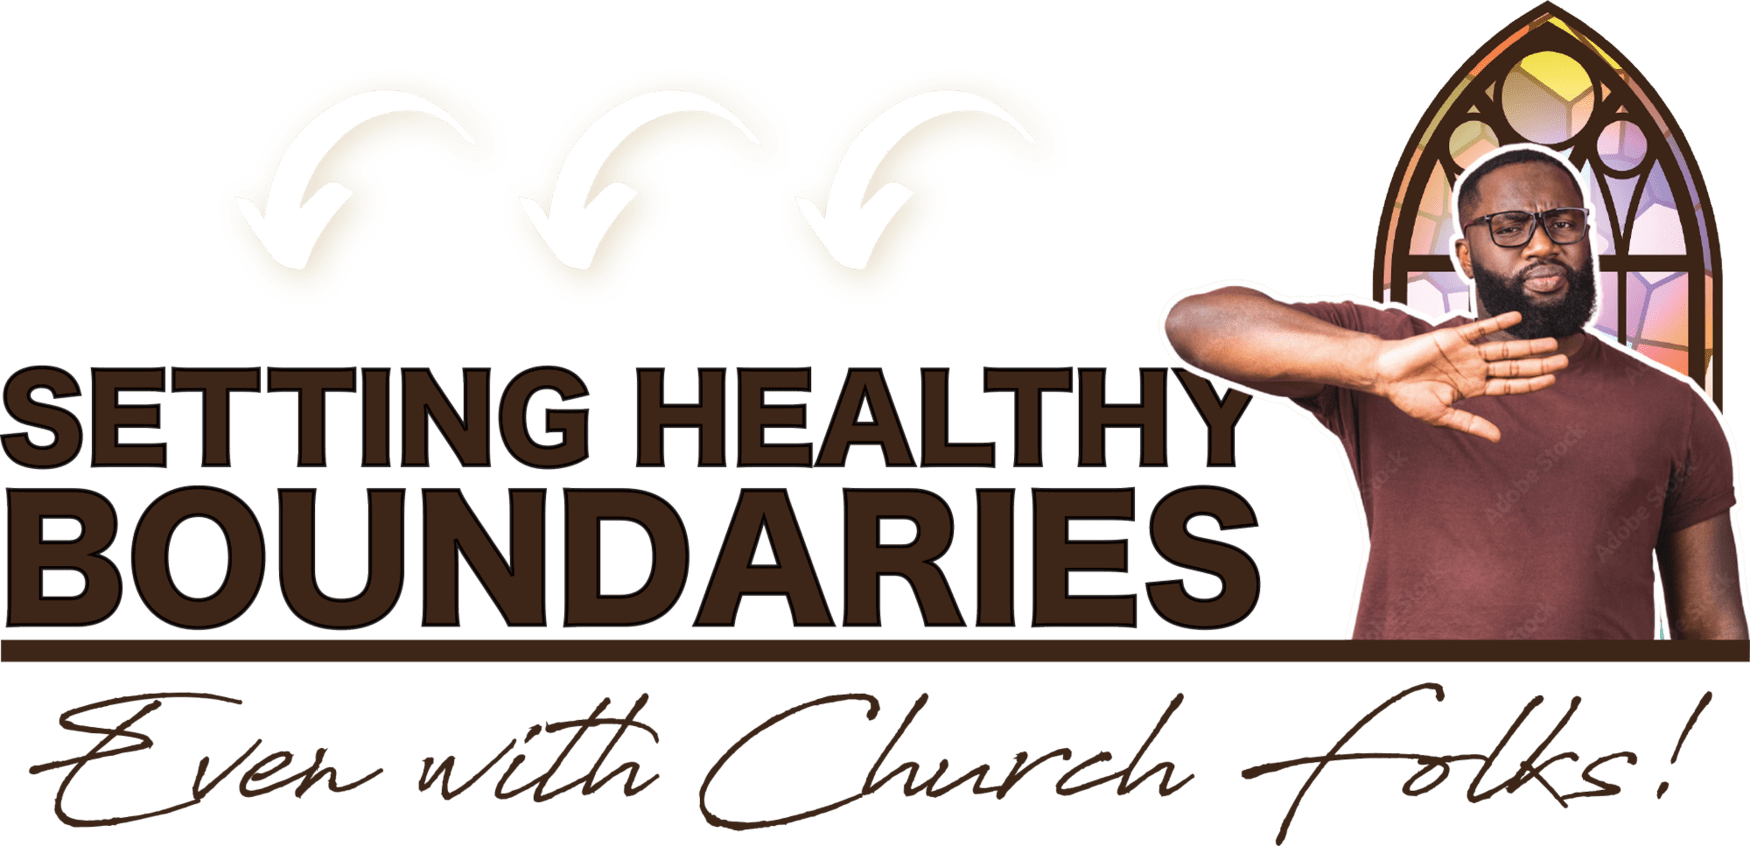 Setting Healthy Boundaries Even with Church Folks!